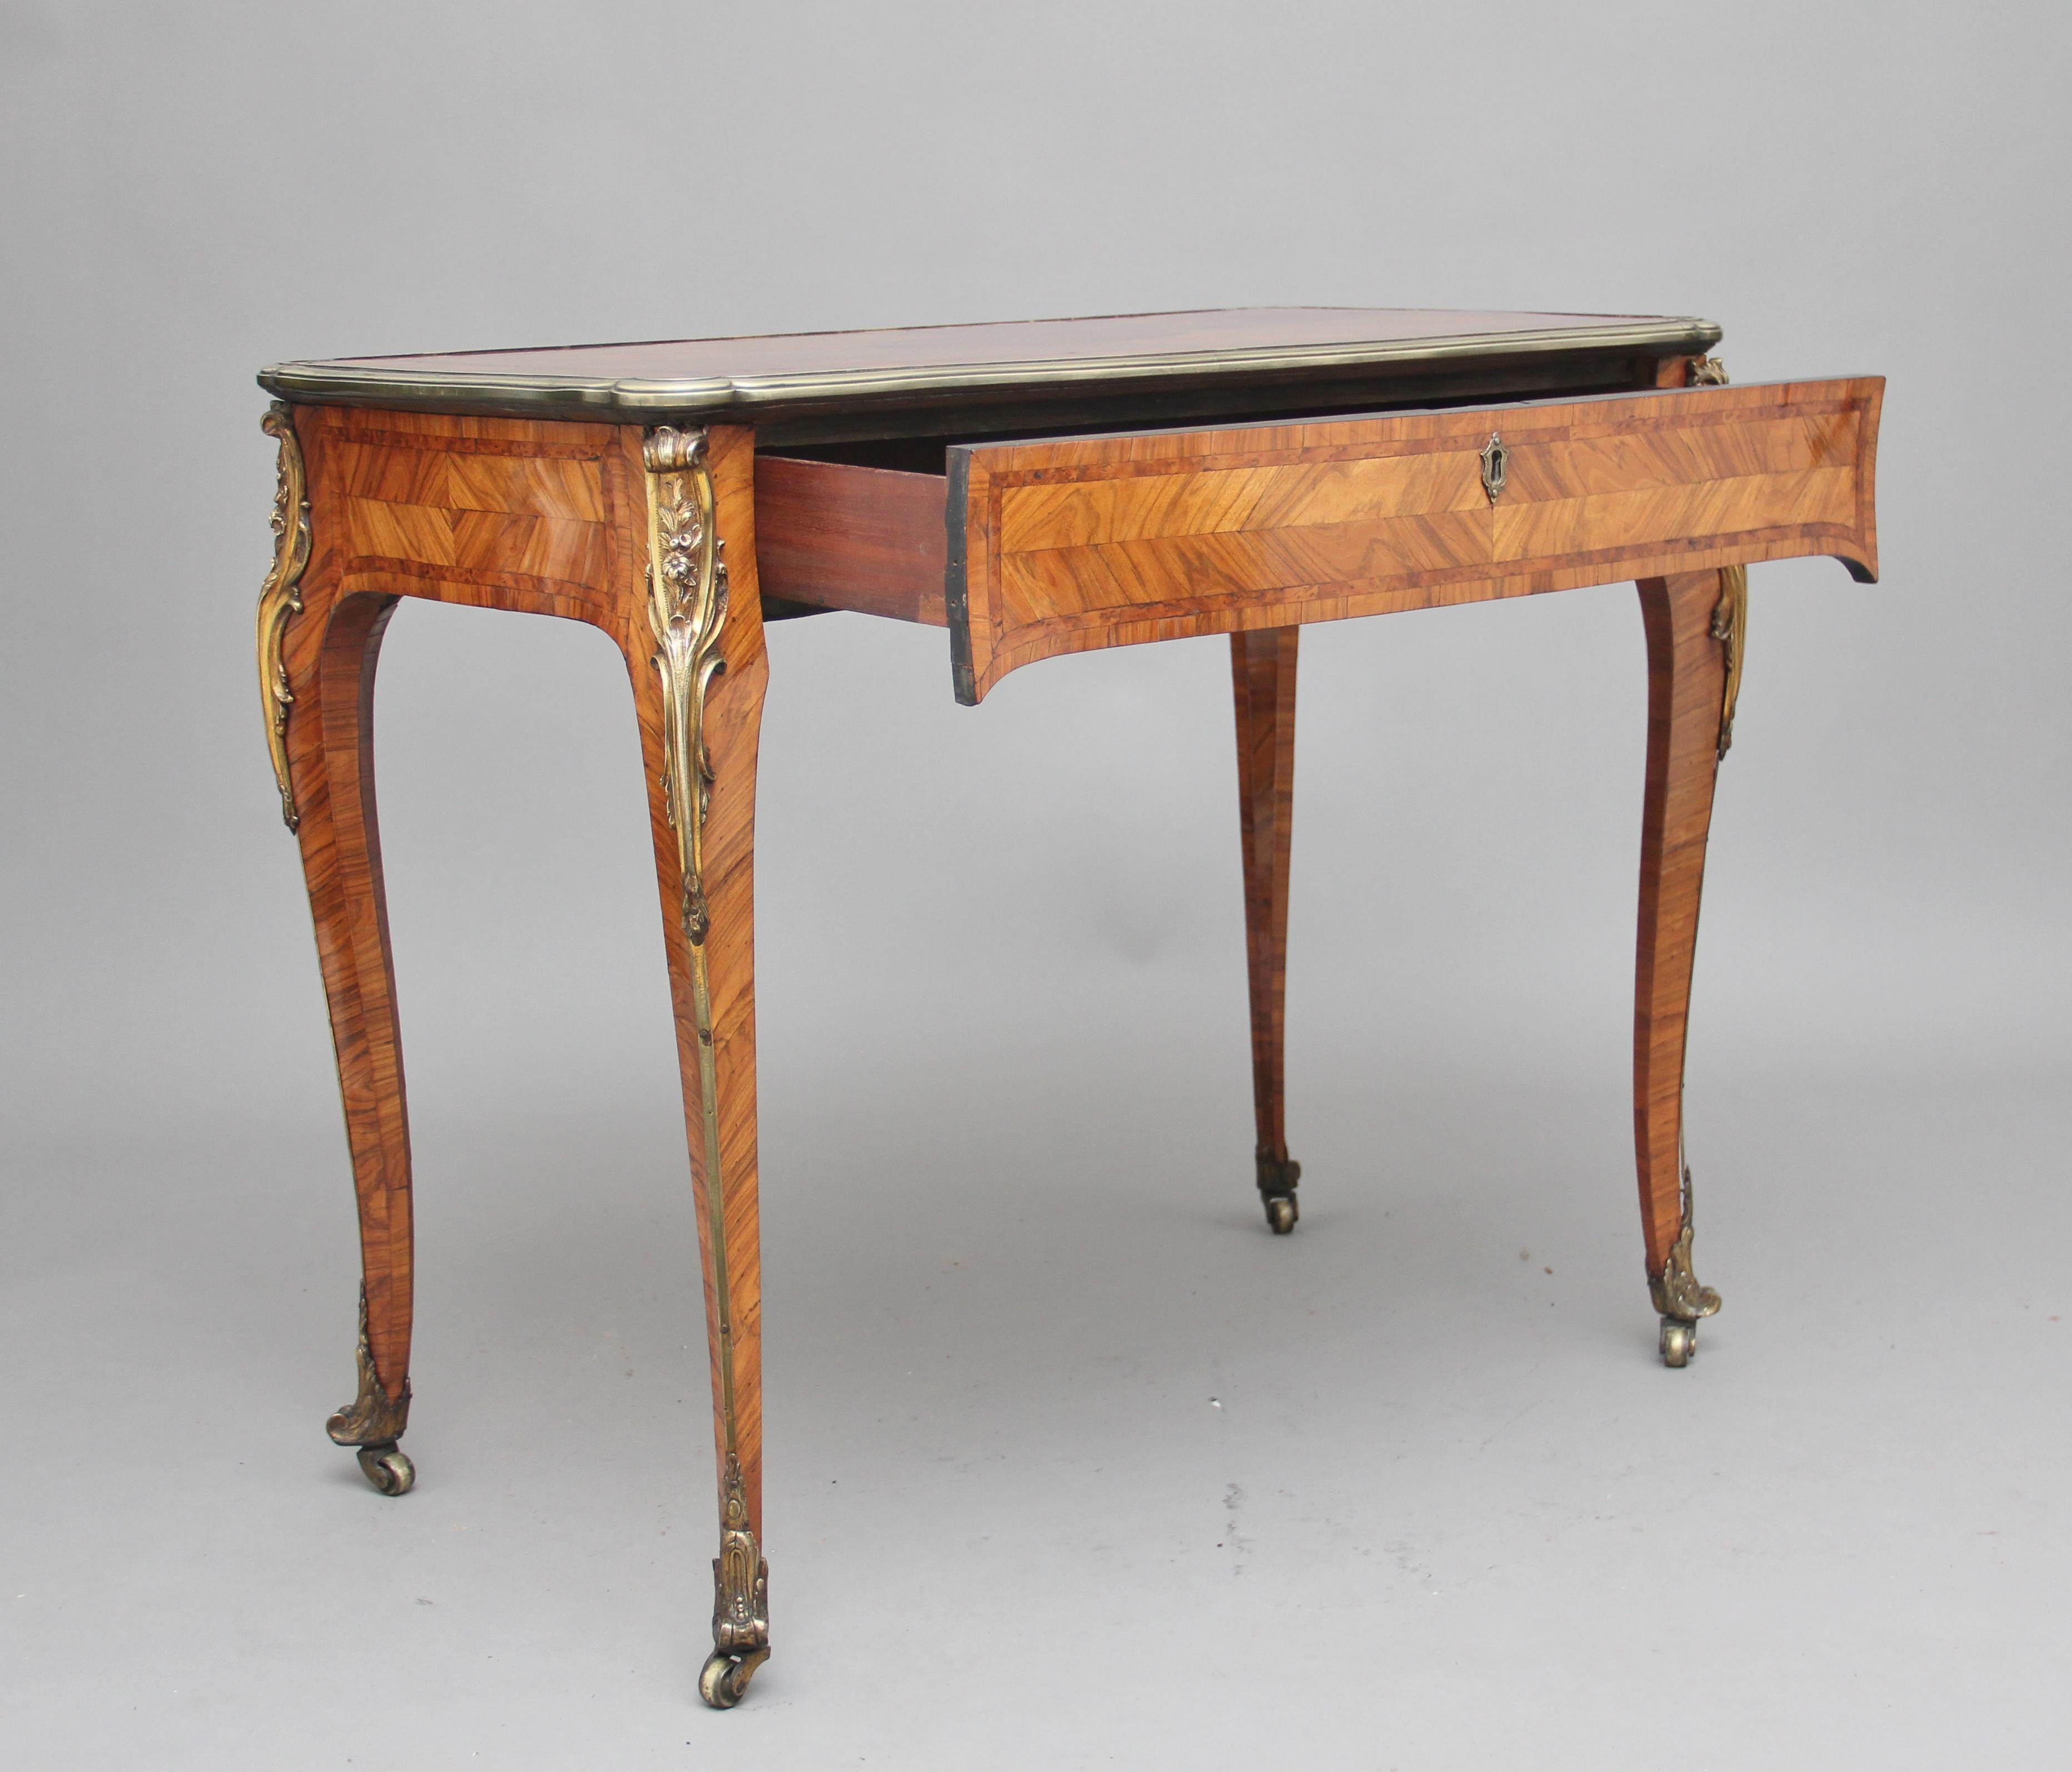 19th century French kingwood centre or side table, the top having a gilt metal moulded edge with a crossbanded, quarter-veneered top inset with a thuya wood oval reserve and band, a single frieze drawer below, lovely quality gilt mounts placed at